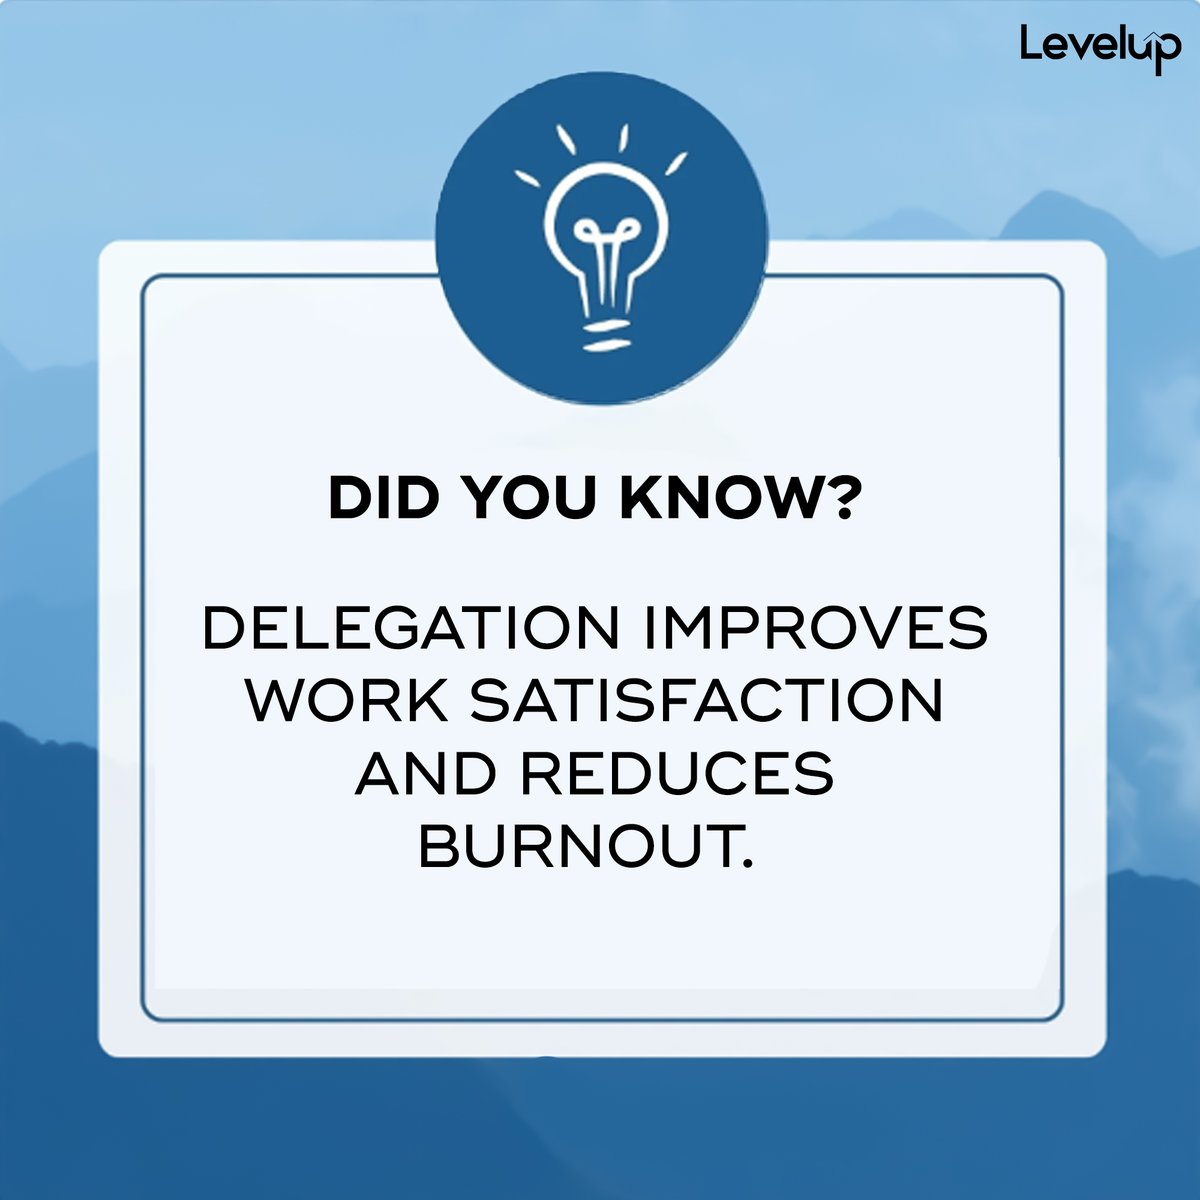 By delegating, you create a healthier work-life balance and prevent burnout, as responsibilities are shared, and individuals can prioritize their well-being.💼💪 
#DelegationBenefits #WorkSatisfaction #PreventBurnout #Empowerment #LinkedIn